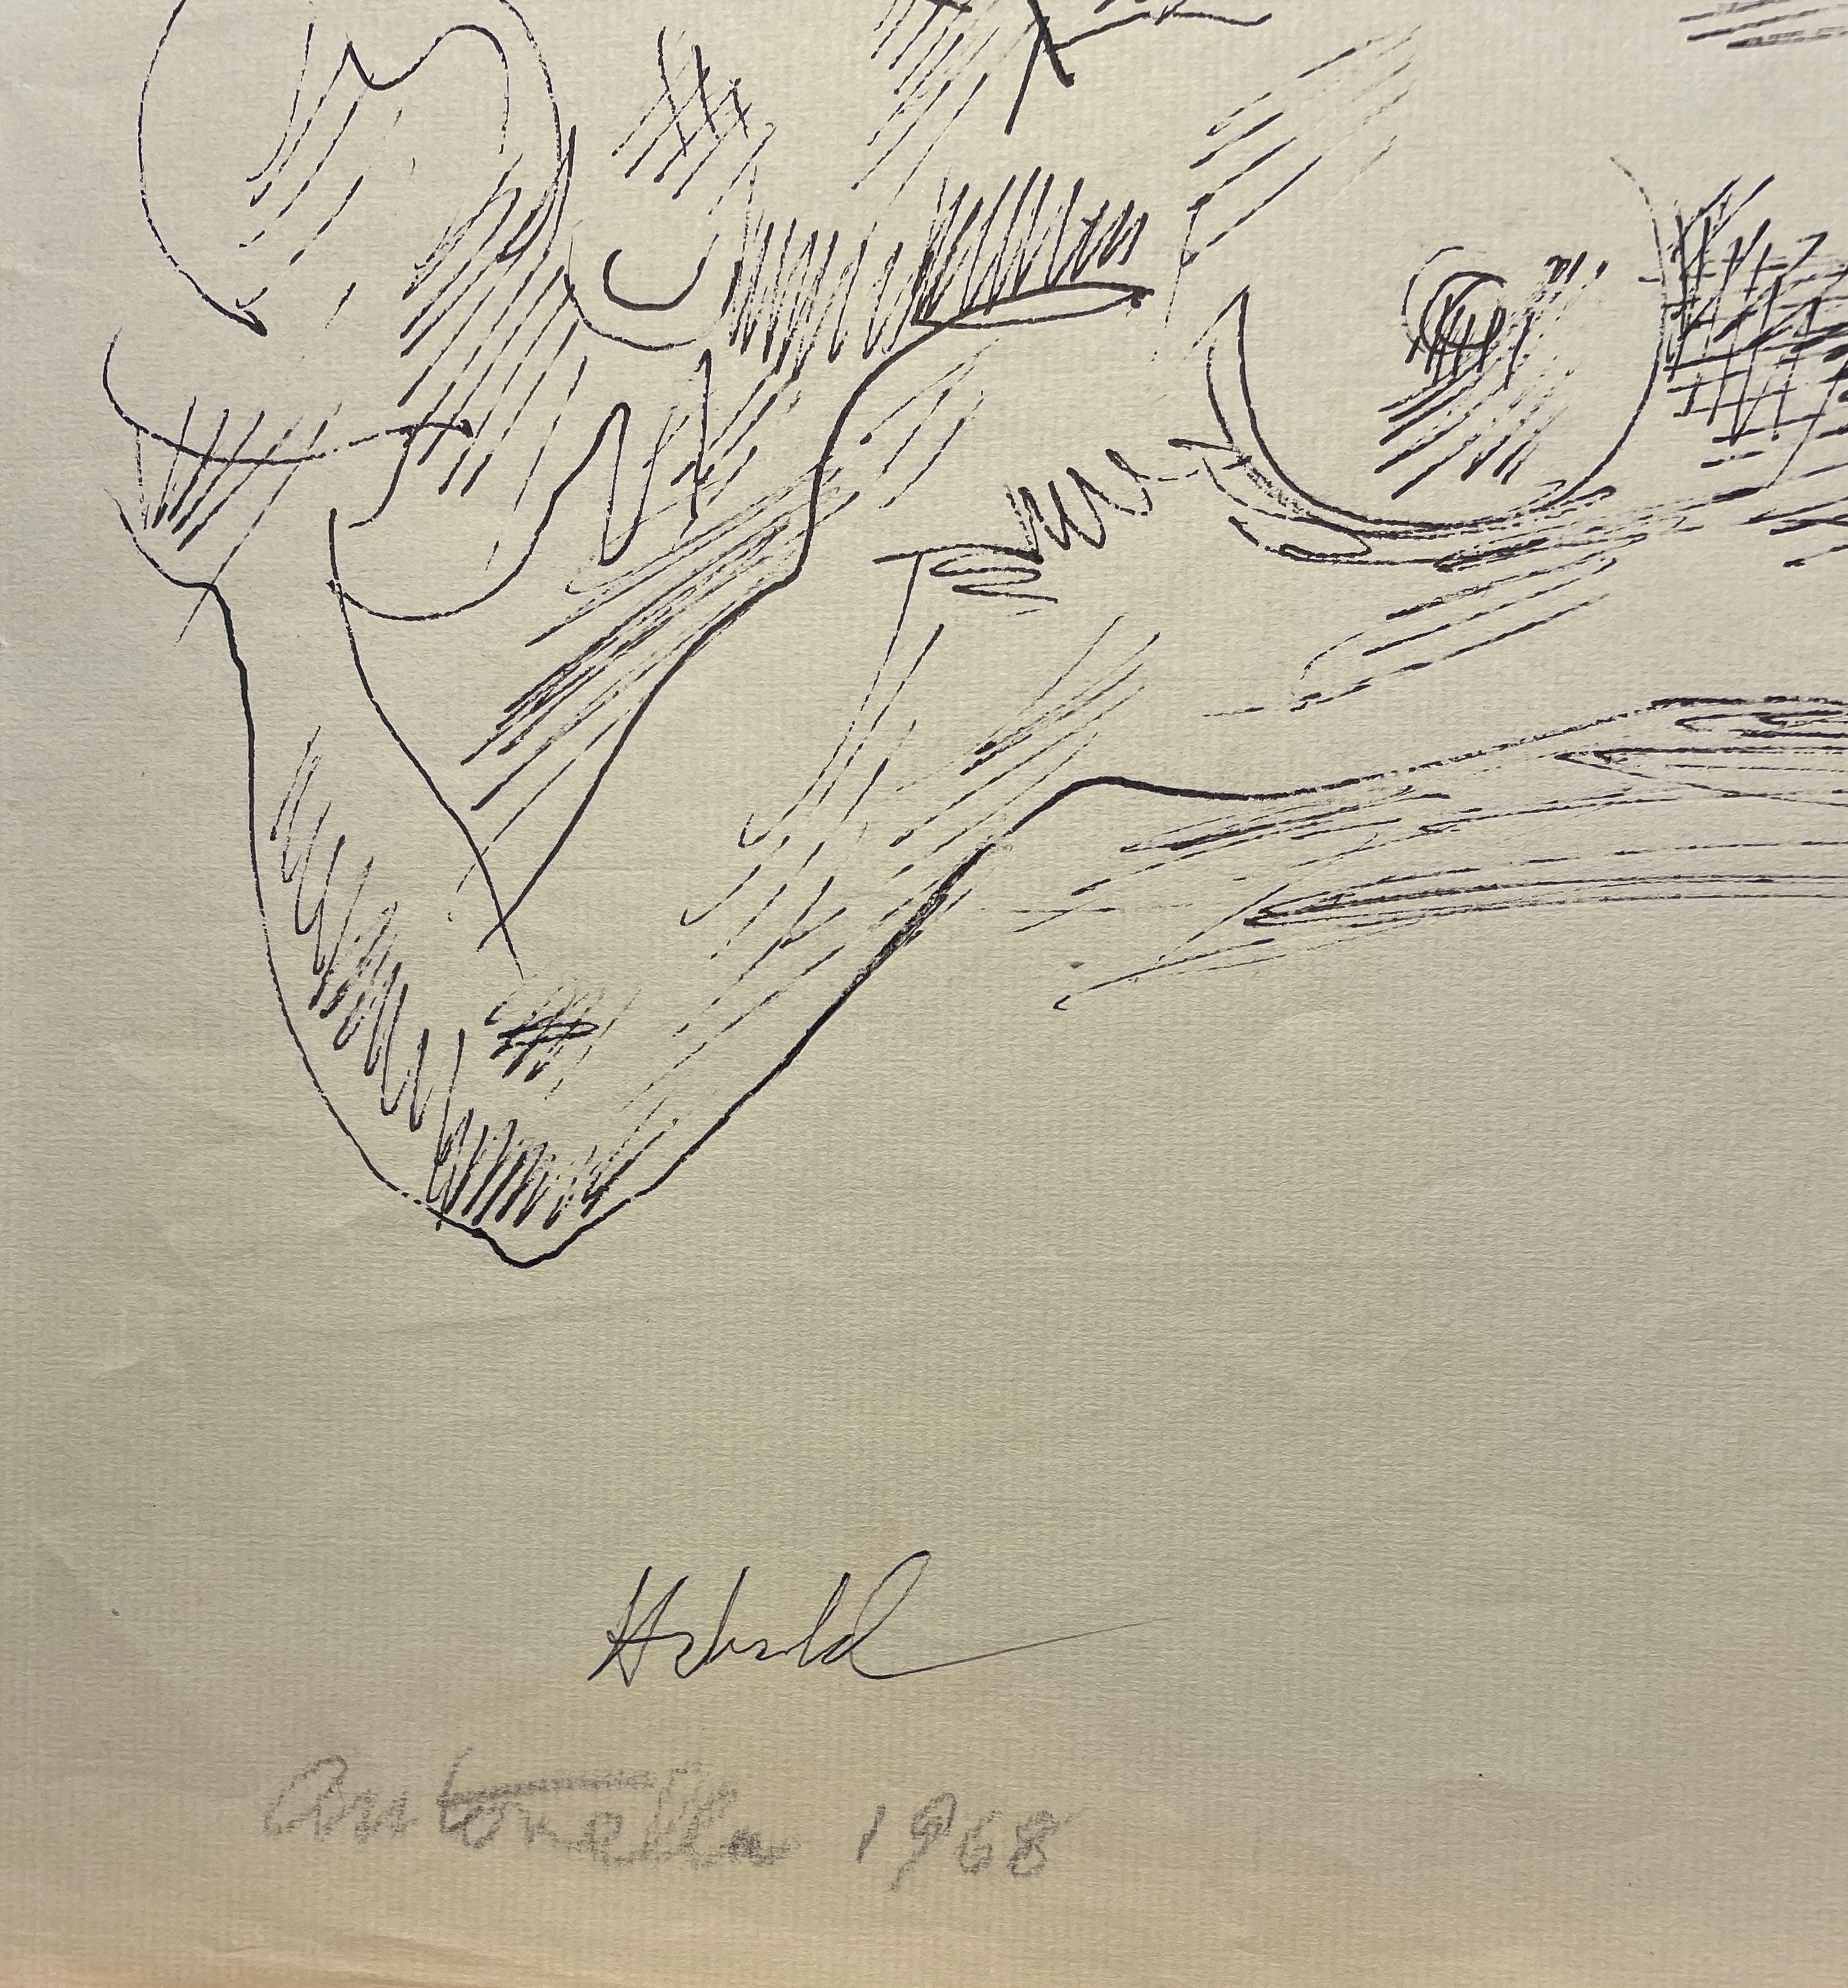 A rare Ink on Paper nude figure drawing by Milton Hebald.  It is especially unique as both side of the paper have fully resolved drawings of the same subject, 'Antonella'.  Hebald is regarded as one of the most important American figurative